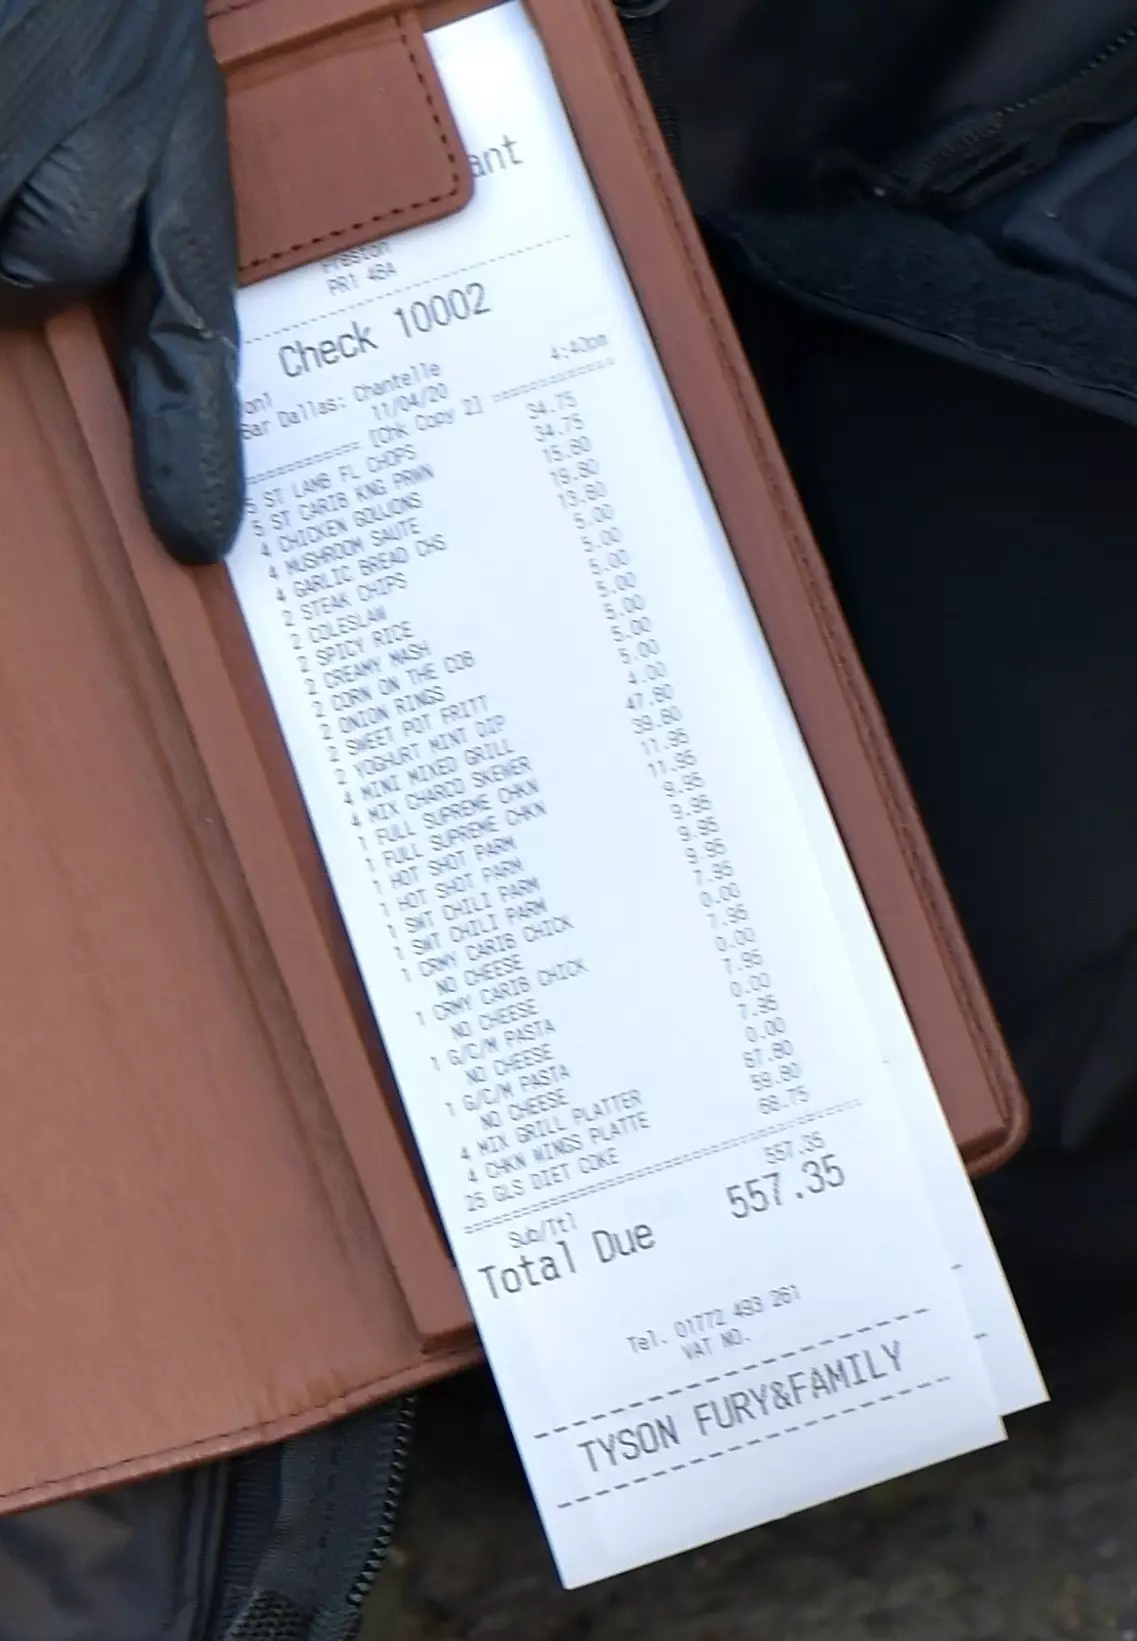 Fury's £557 bill for the takeaway.